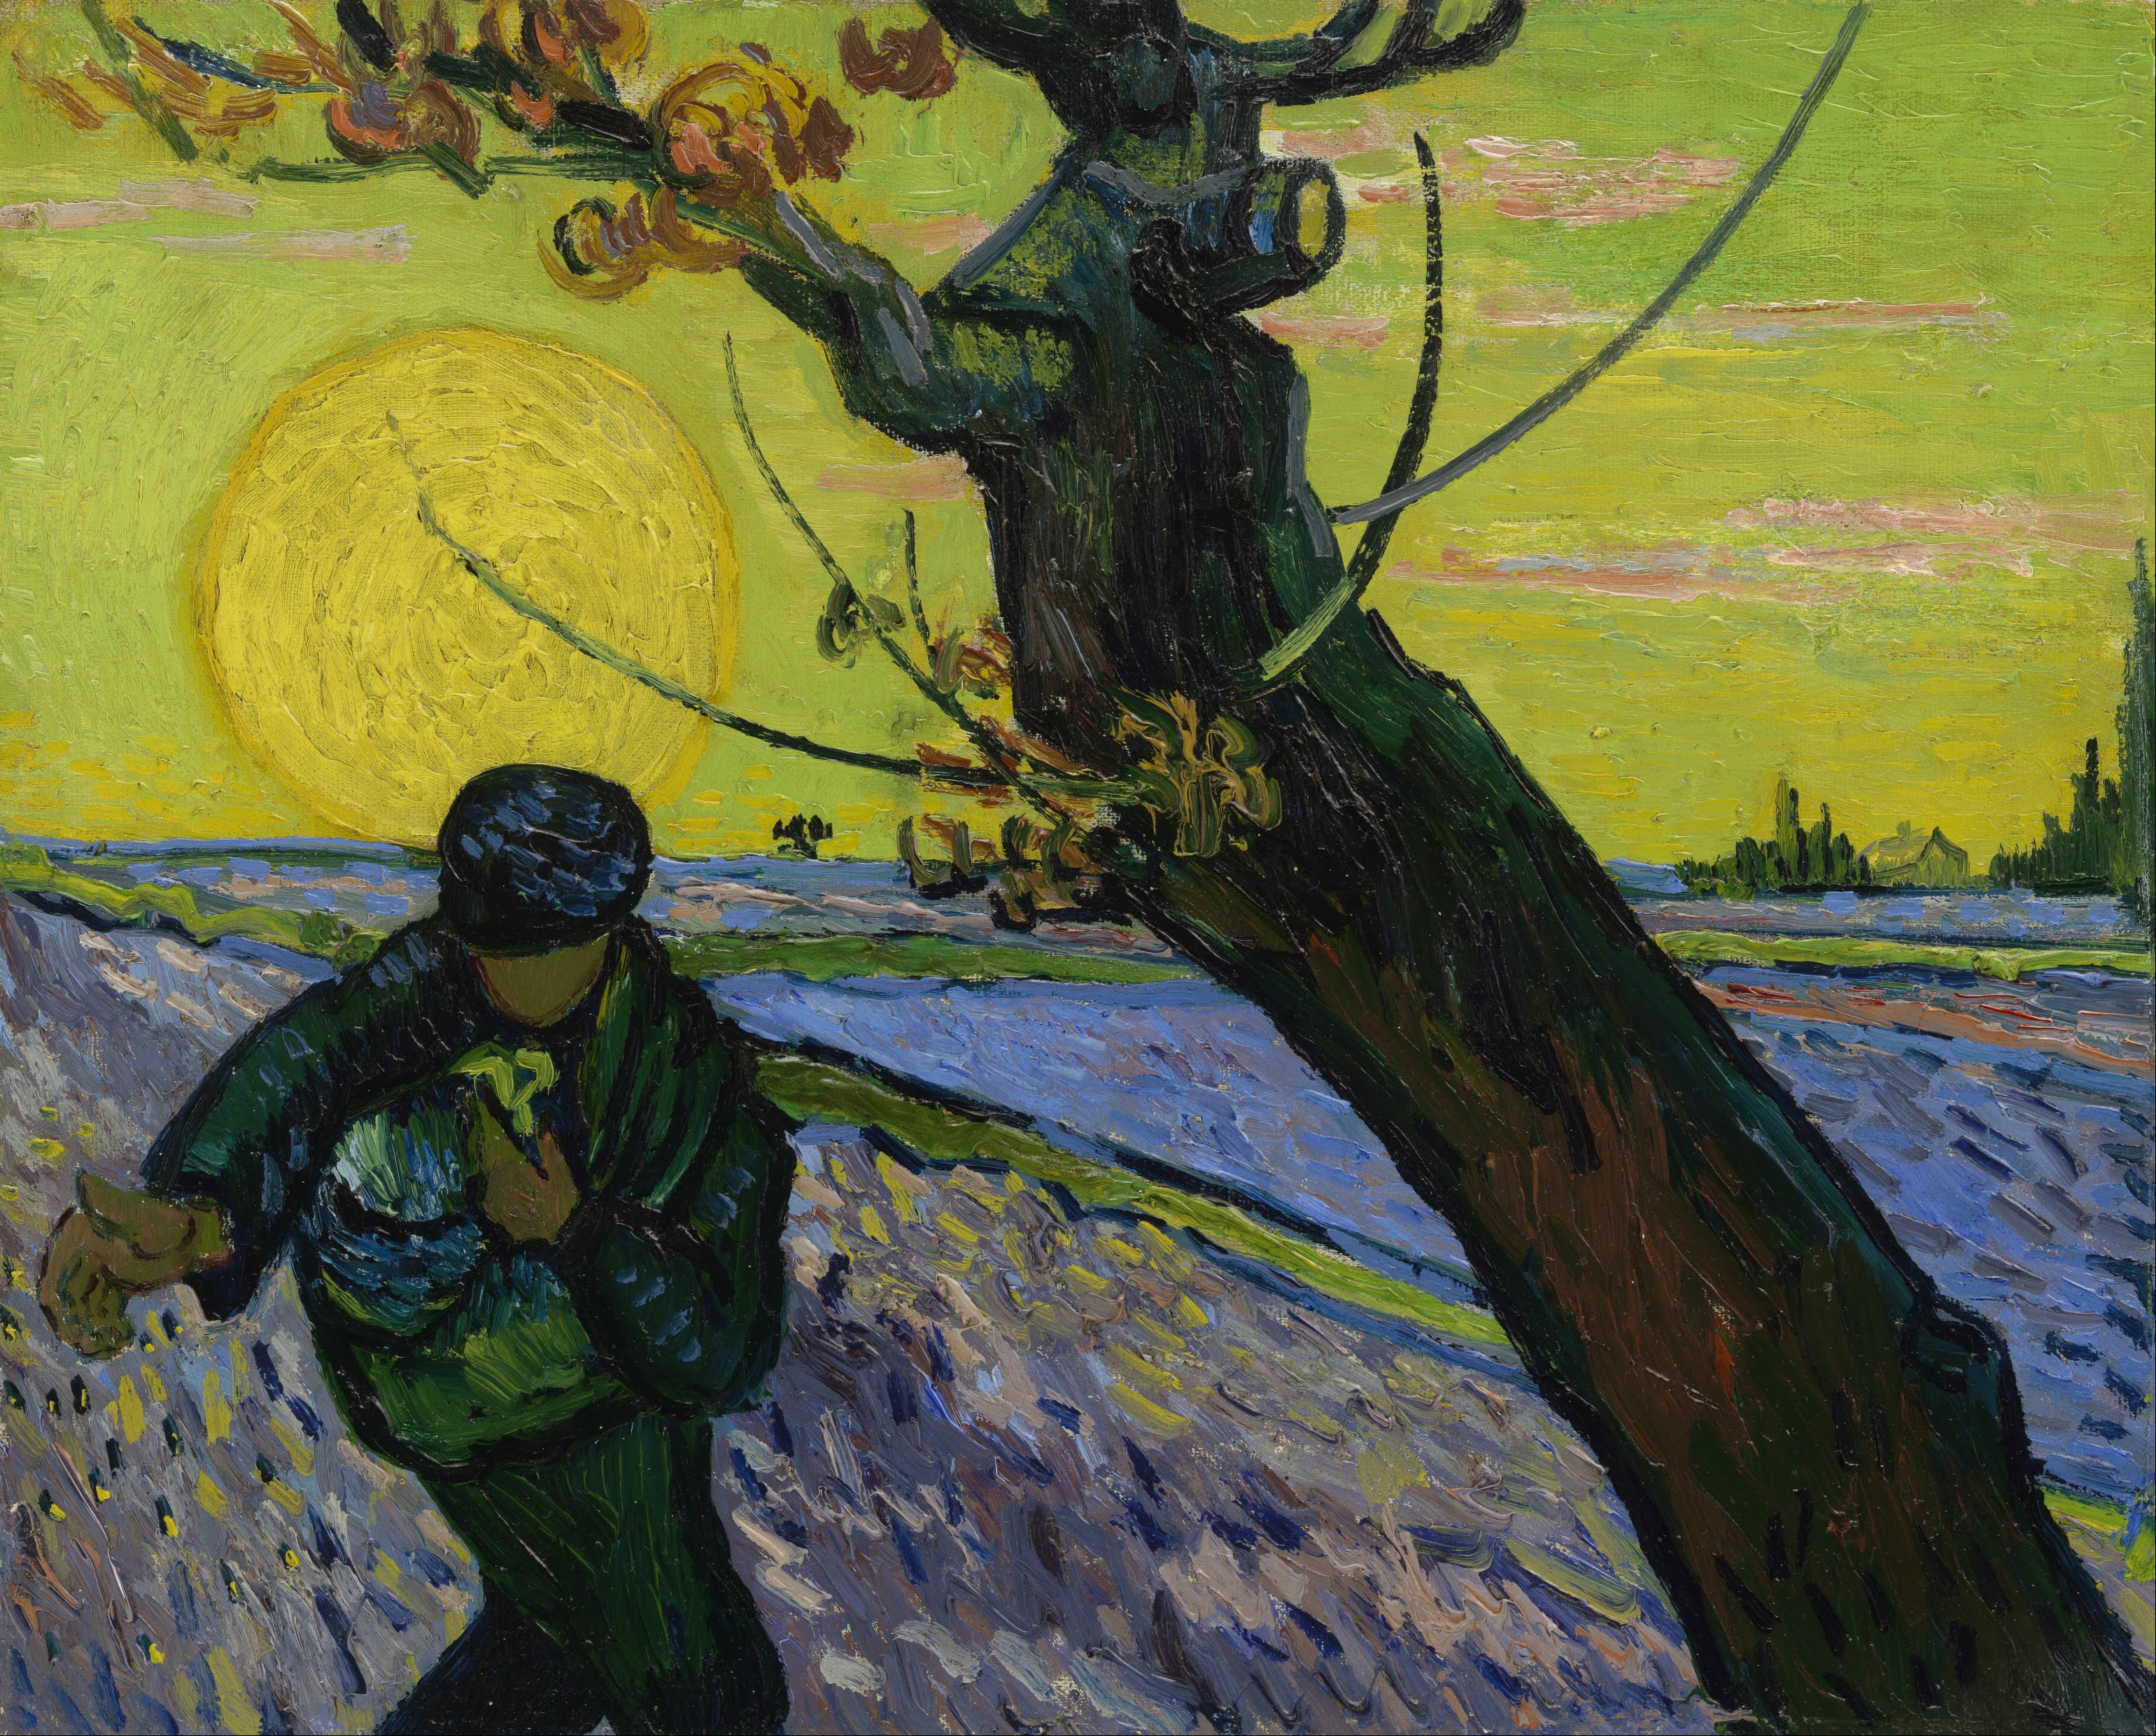 MyFrenchLife™ – MyFrenchLife.org - Paris in March - 2017 - Paris in spring - whats on - Vincent van Gogh - The Sower - Le Semeur - Art Exhibition